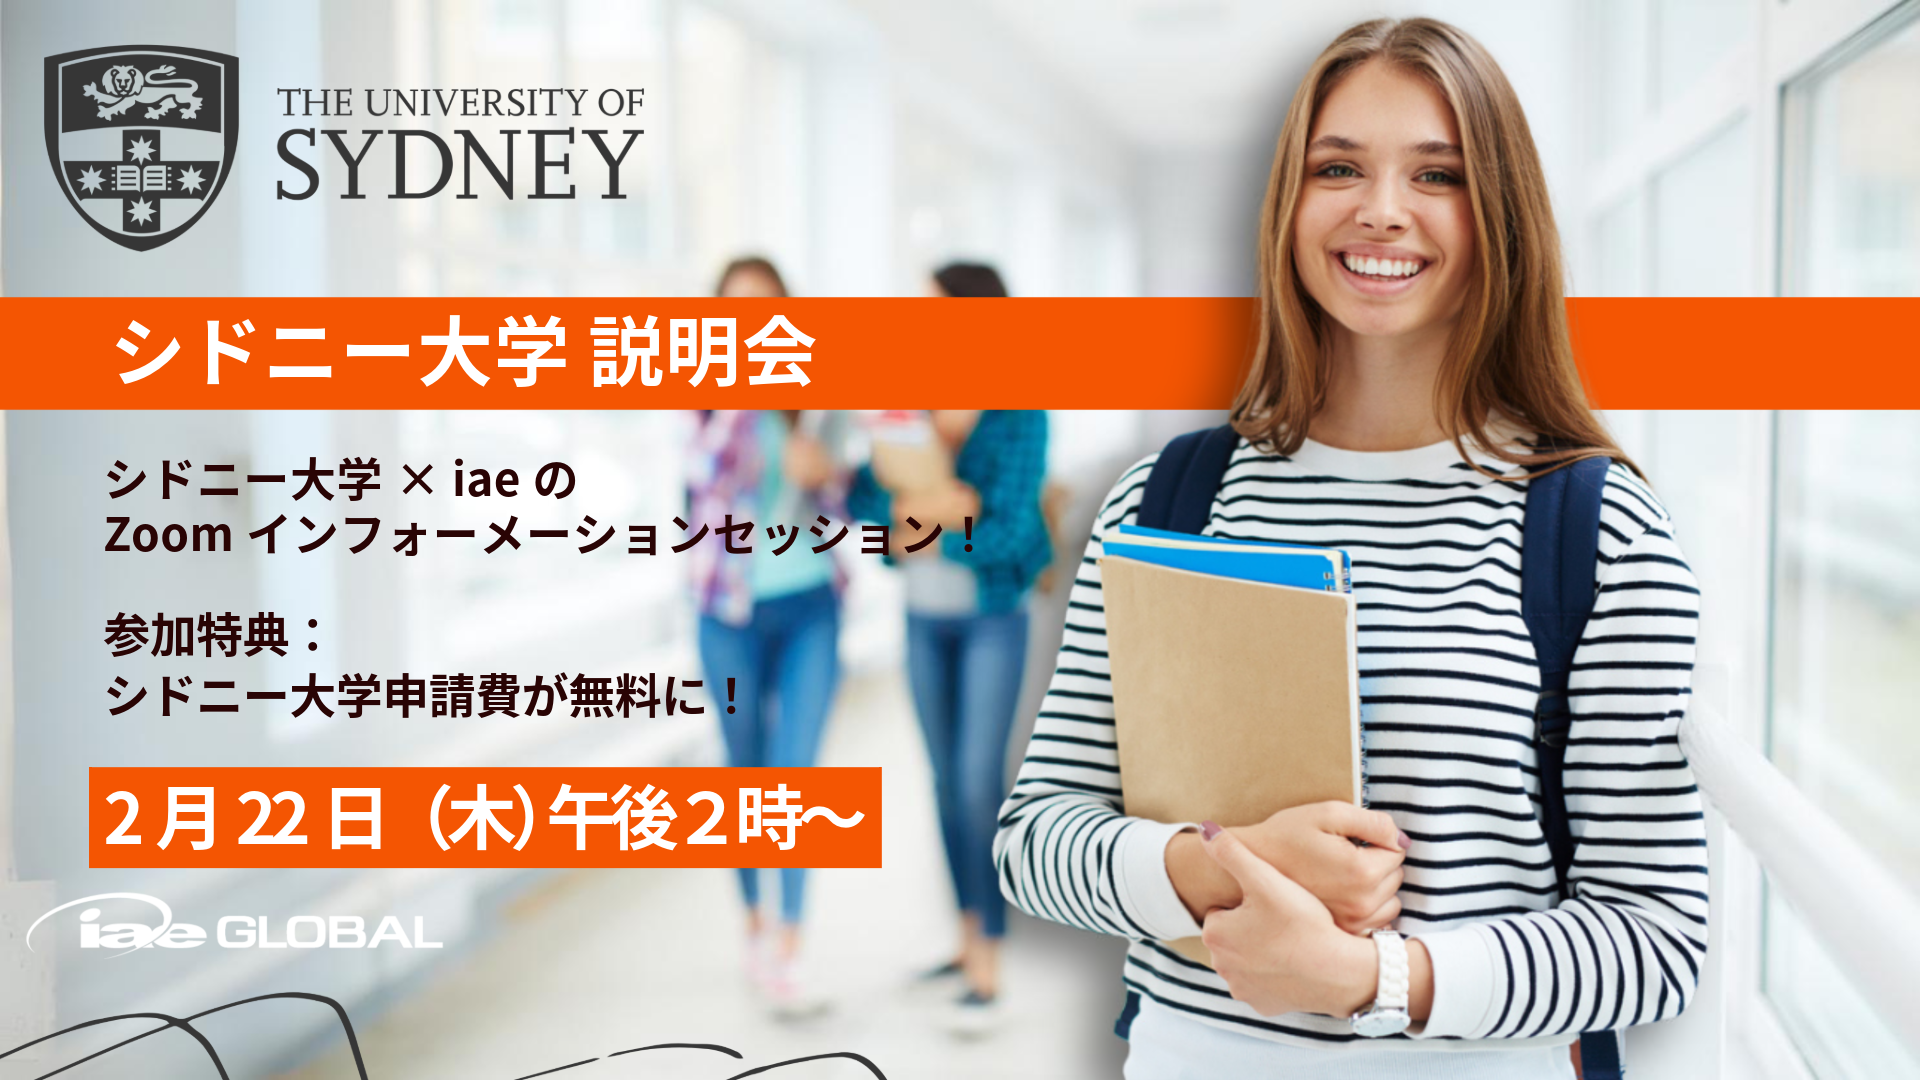 USYD info session banner